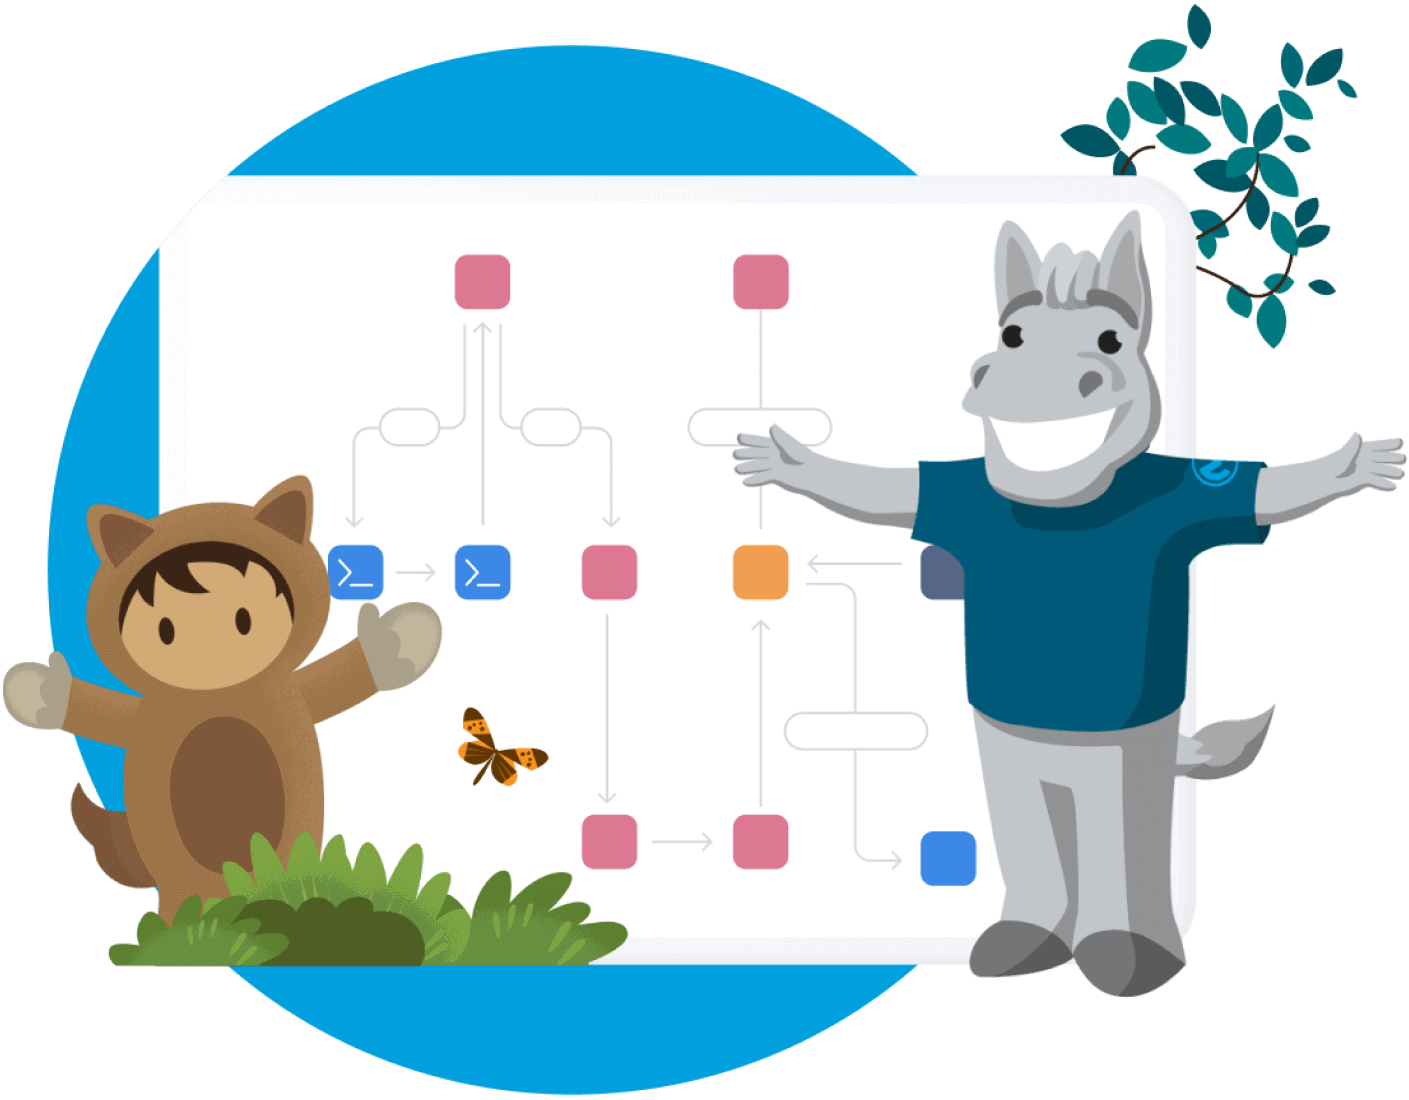 Turnkey connectivity for Salesforce, powered by MuleSoft.